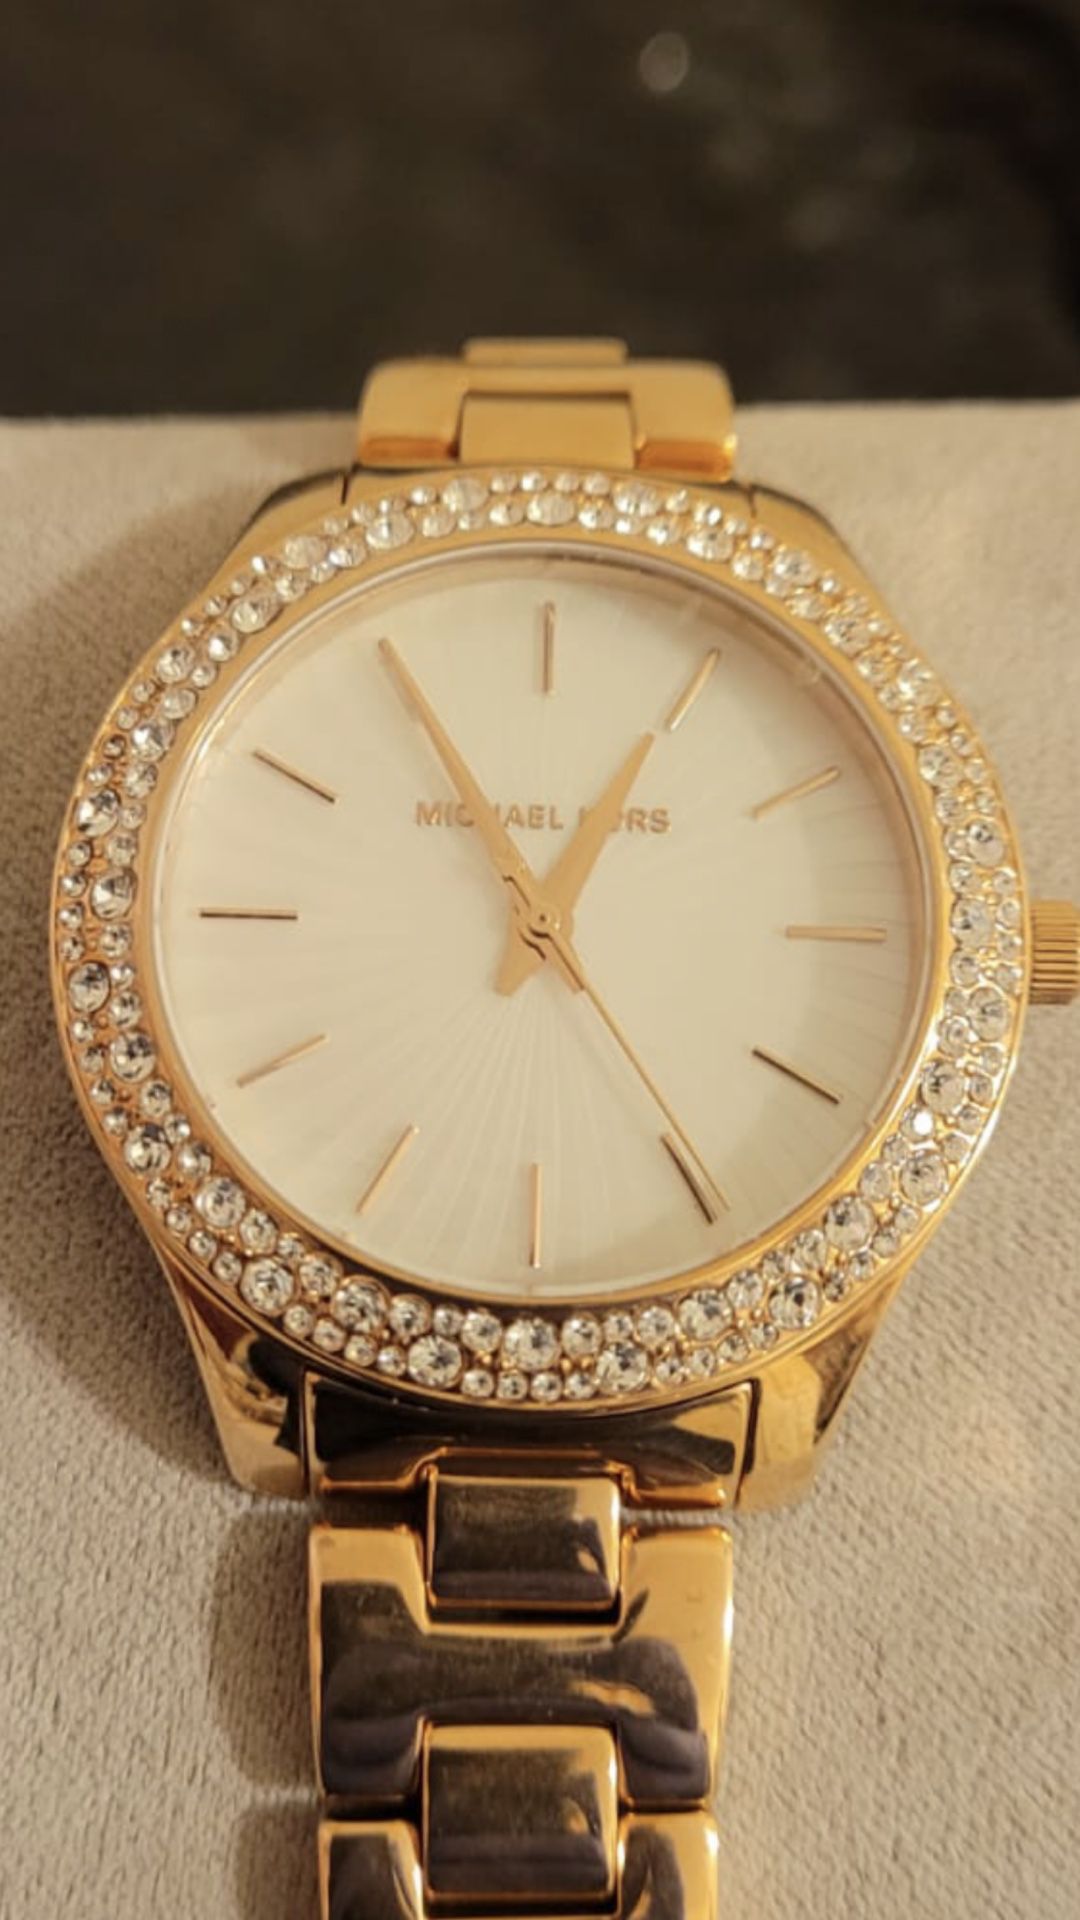 Authentic Michael Kors Watch For Women 